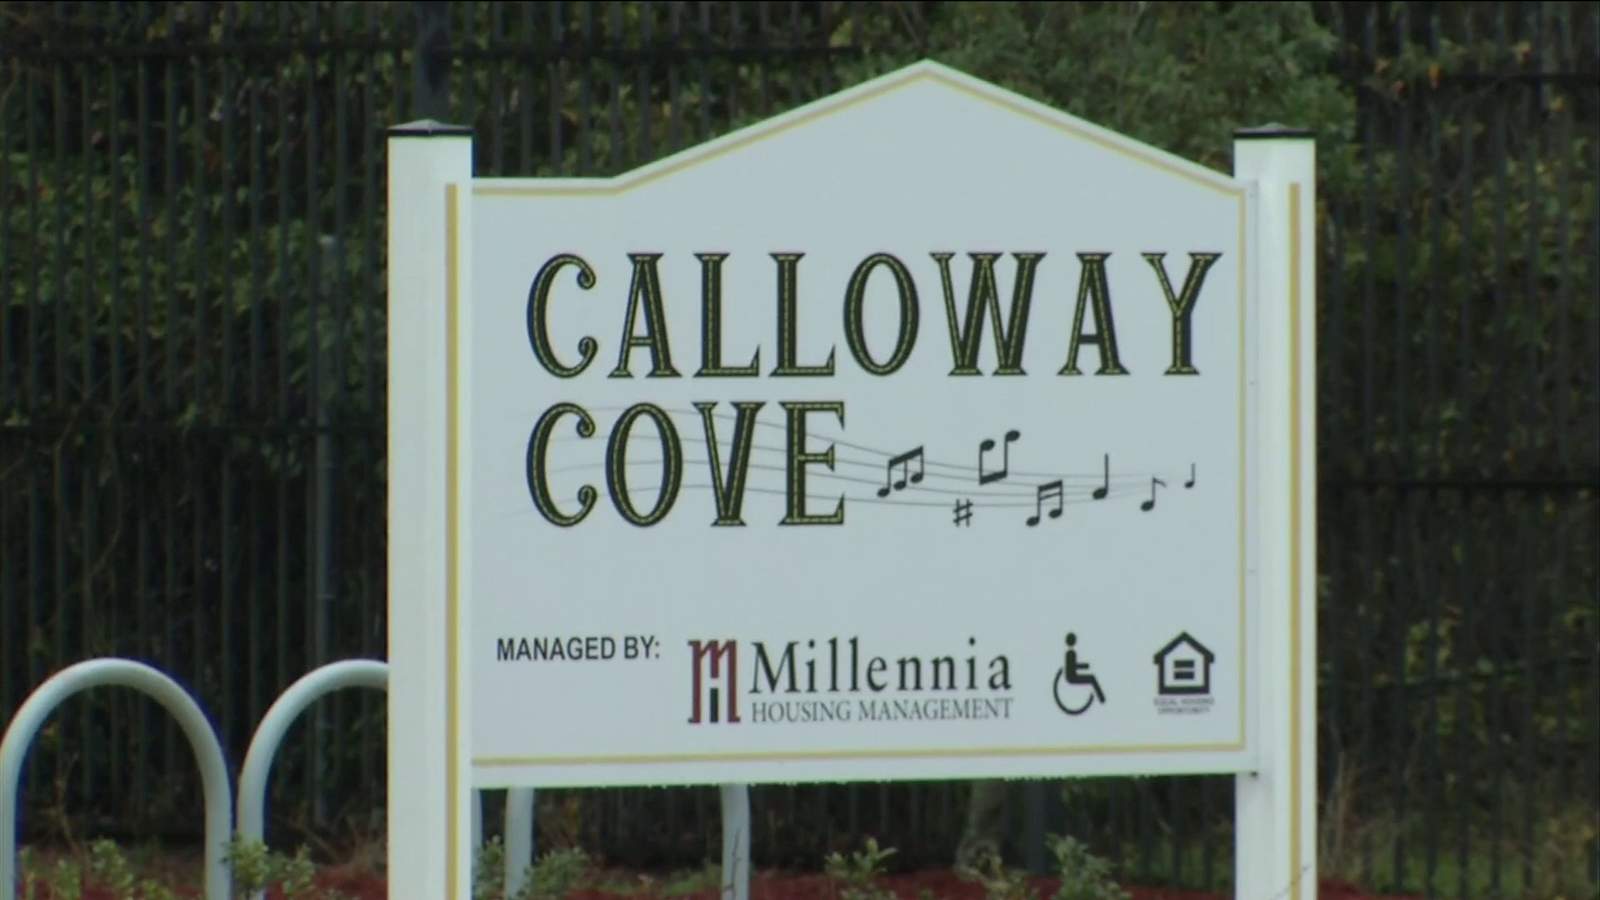 Man killed at night in Calloway Cove;  Killed 4th there this week